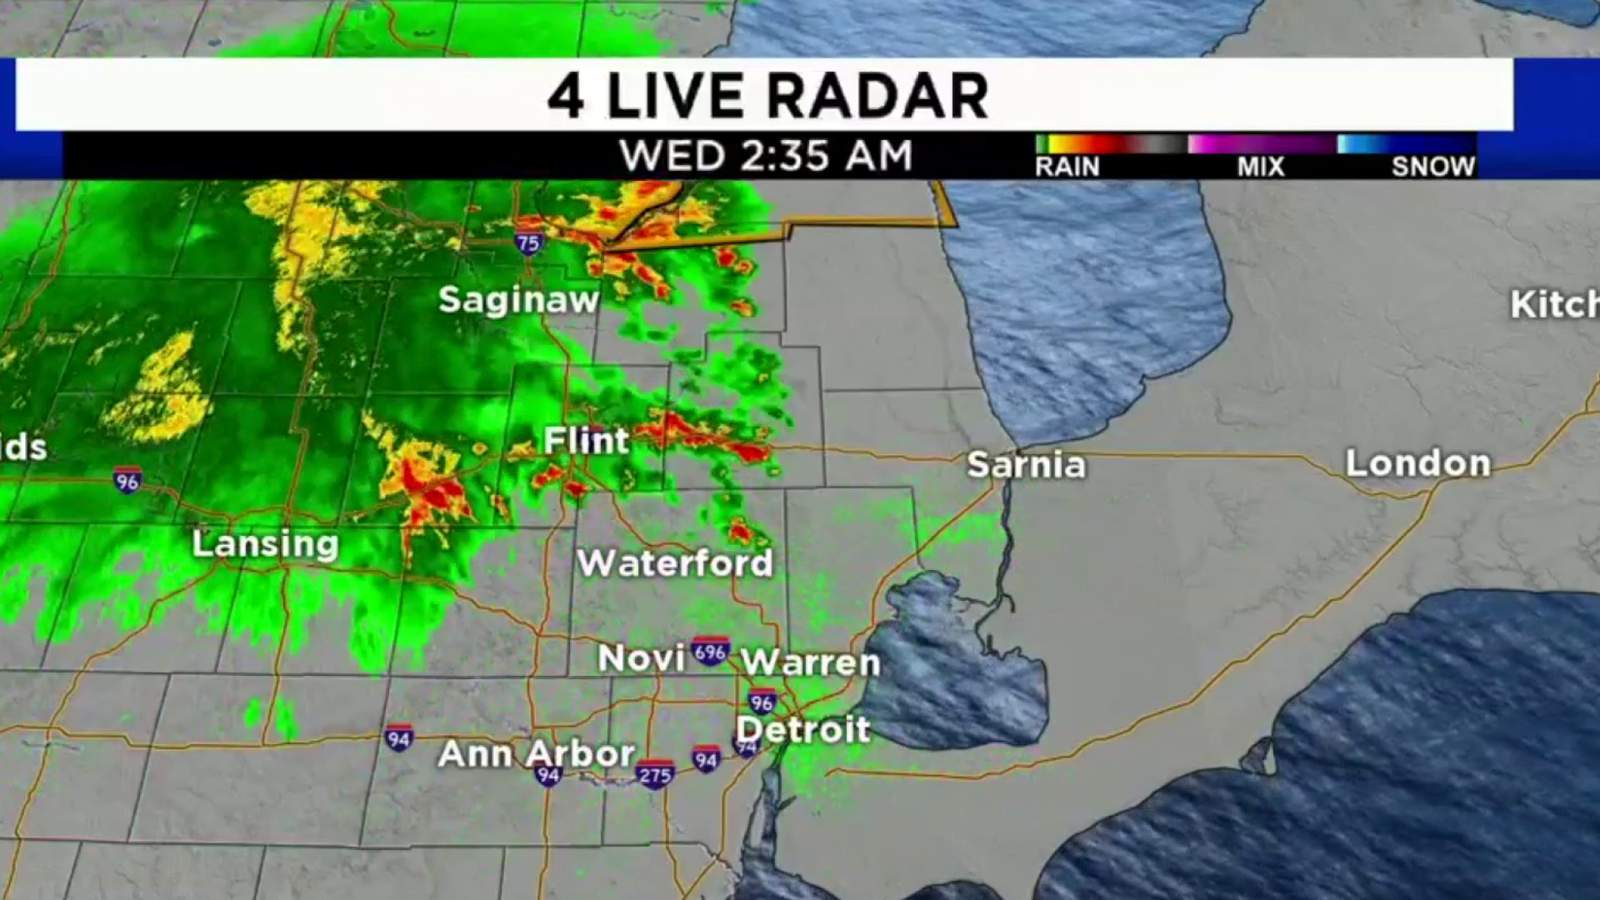 Severe weather moves through parts of Michigan overnight